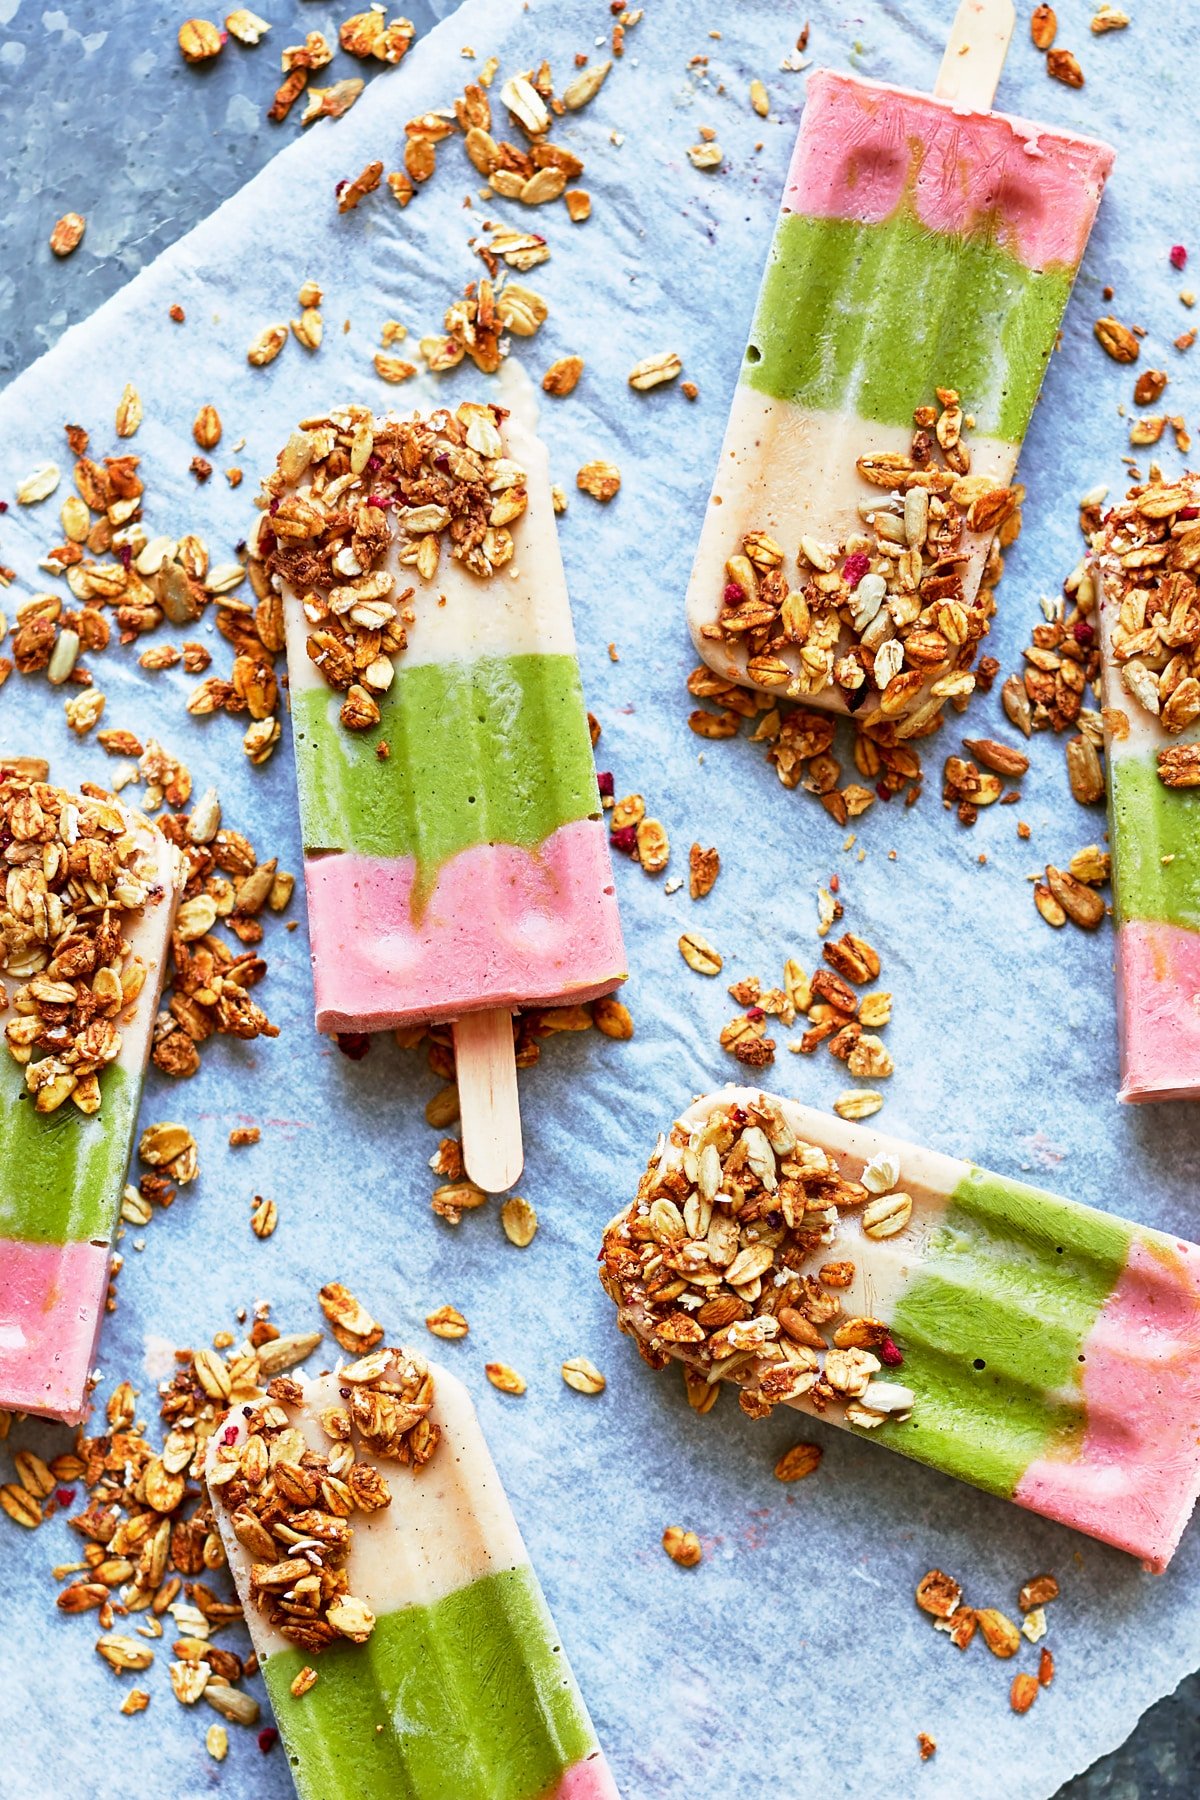 A close up of some fruit and veg lollies arranged on a piece of baking paper on a granite board. The lollies have been dipped in granola.